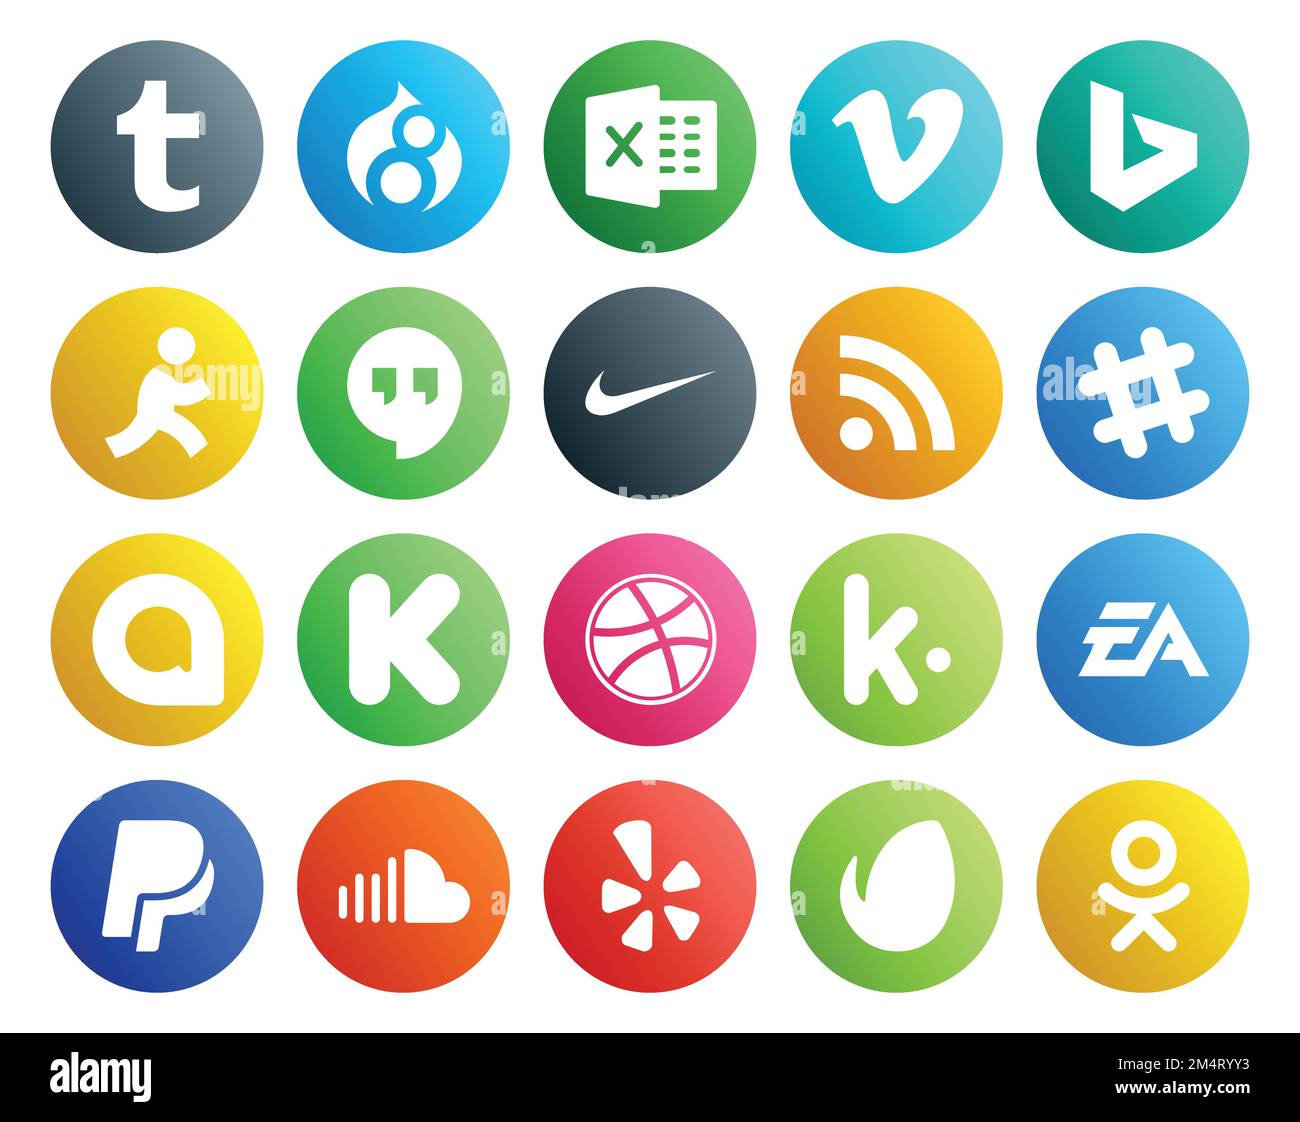 Kik logo Cut Out Stock Images & Pictures - Page 2 - Alamy